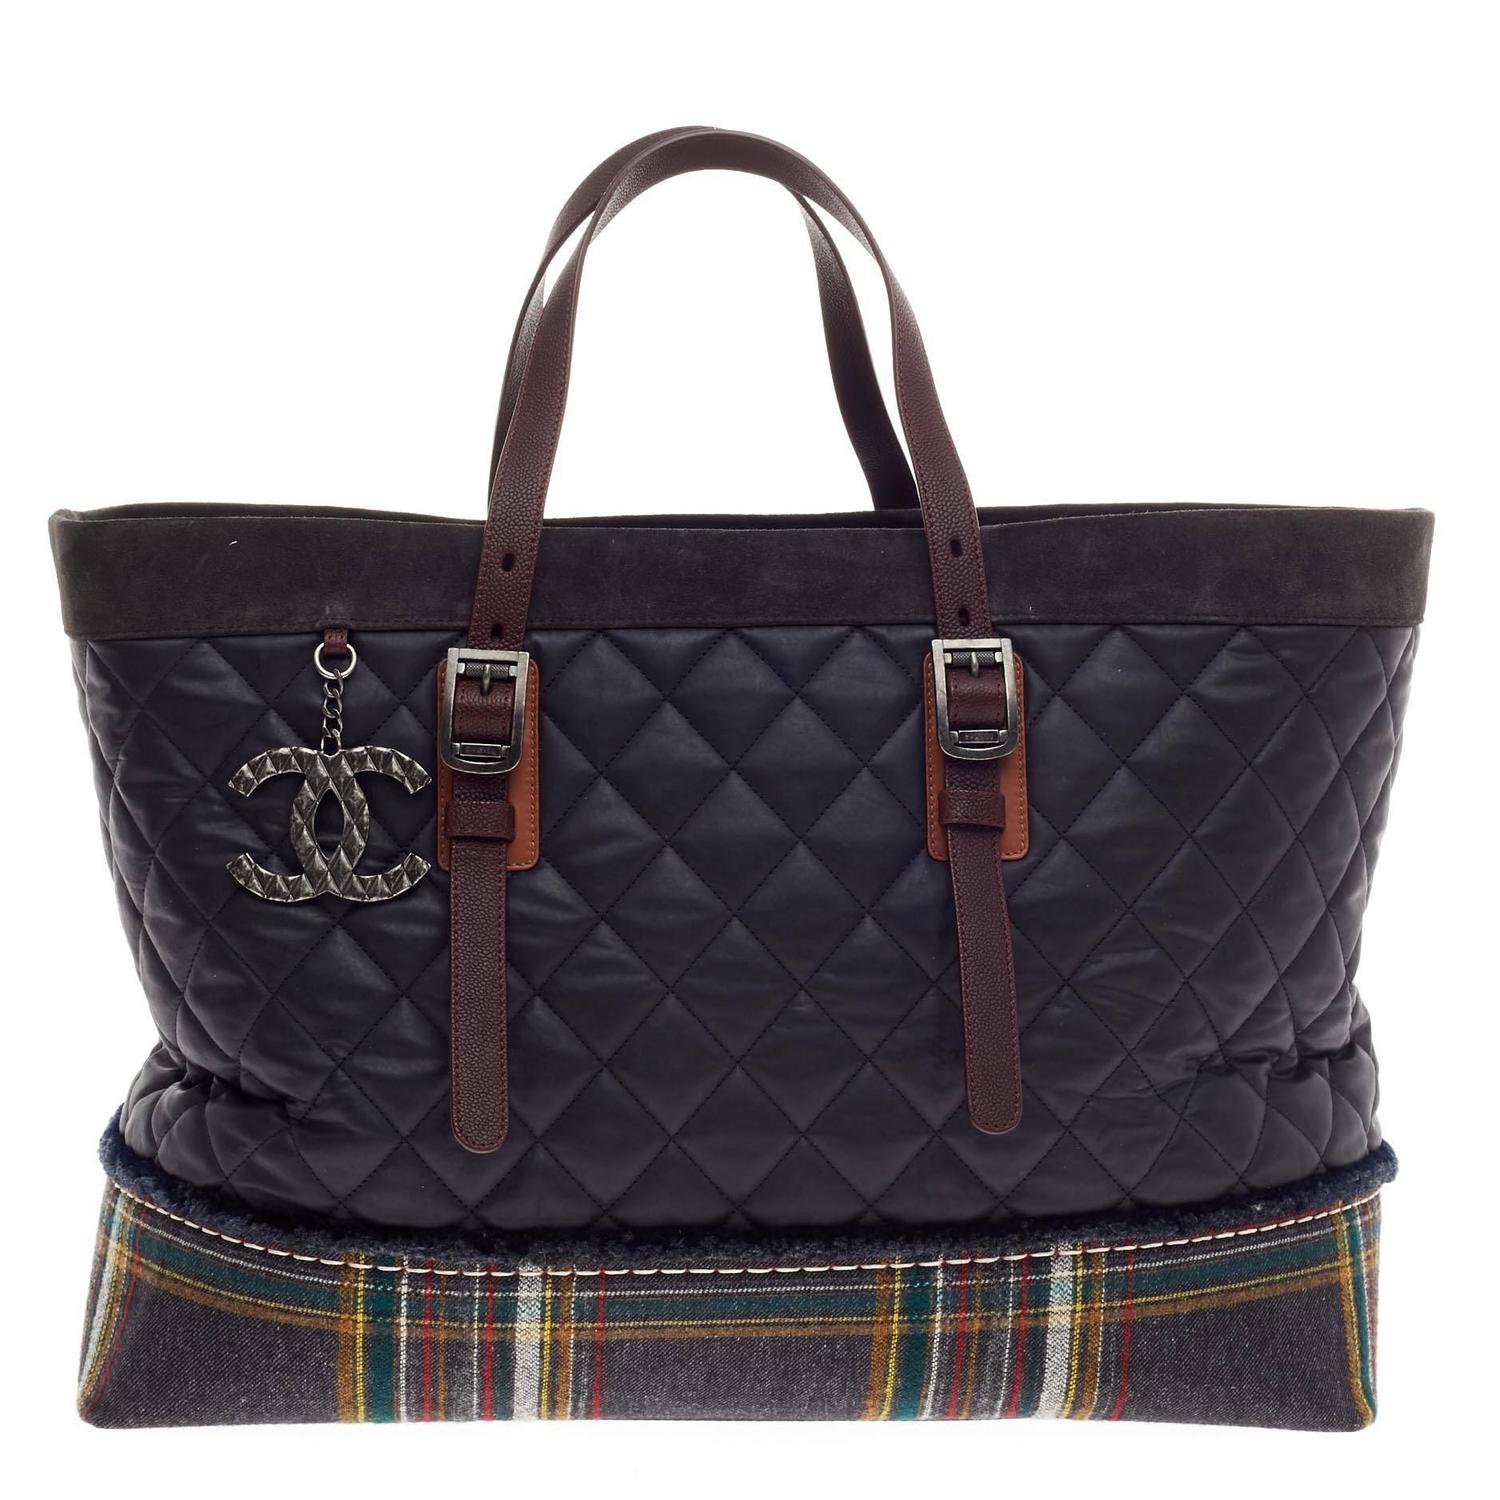 Chanel Paris-Edinburgh Tote Mixed Leather with Flannel at 1stdibs